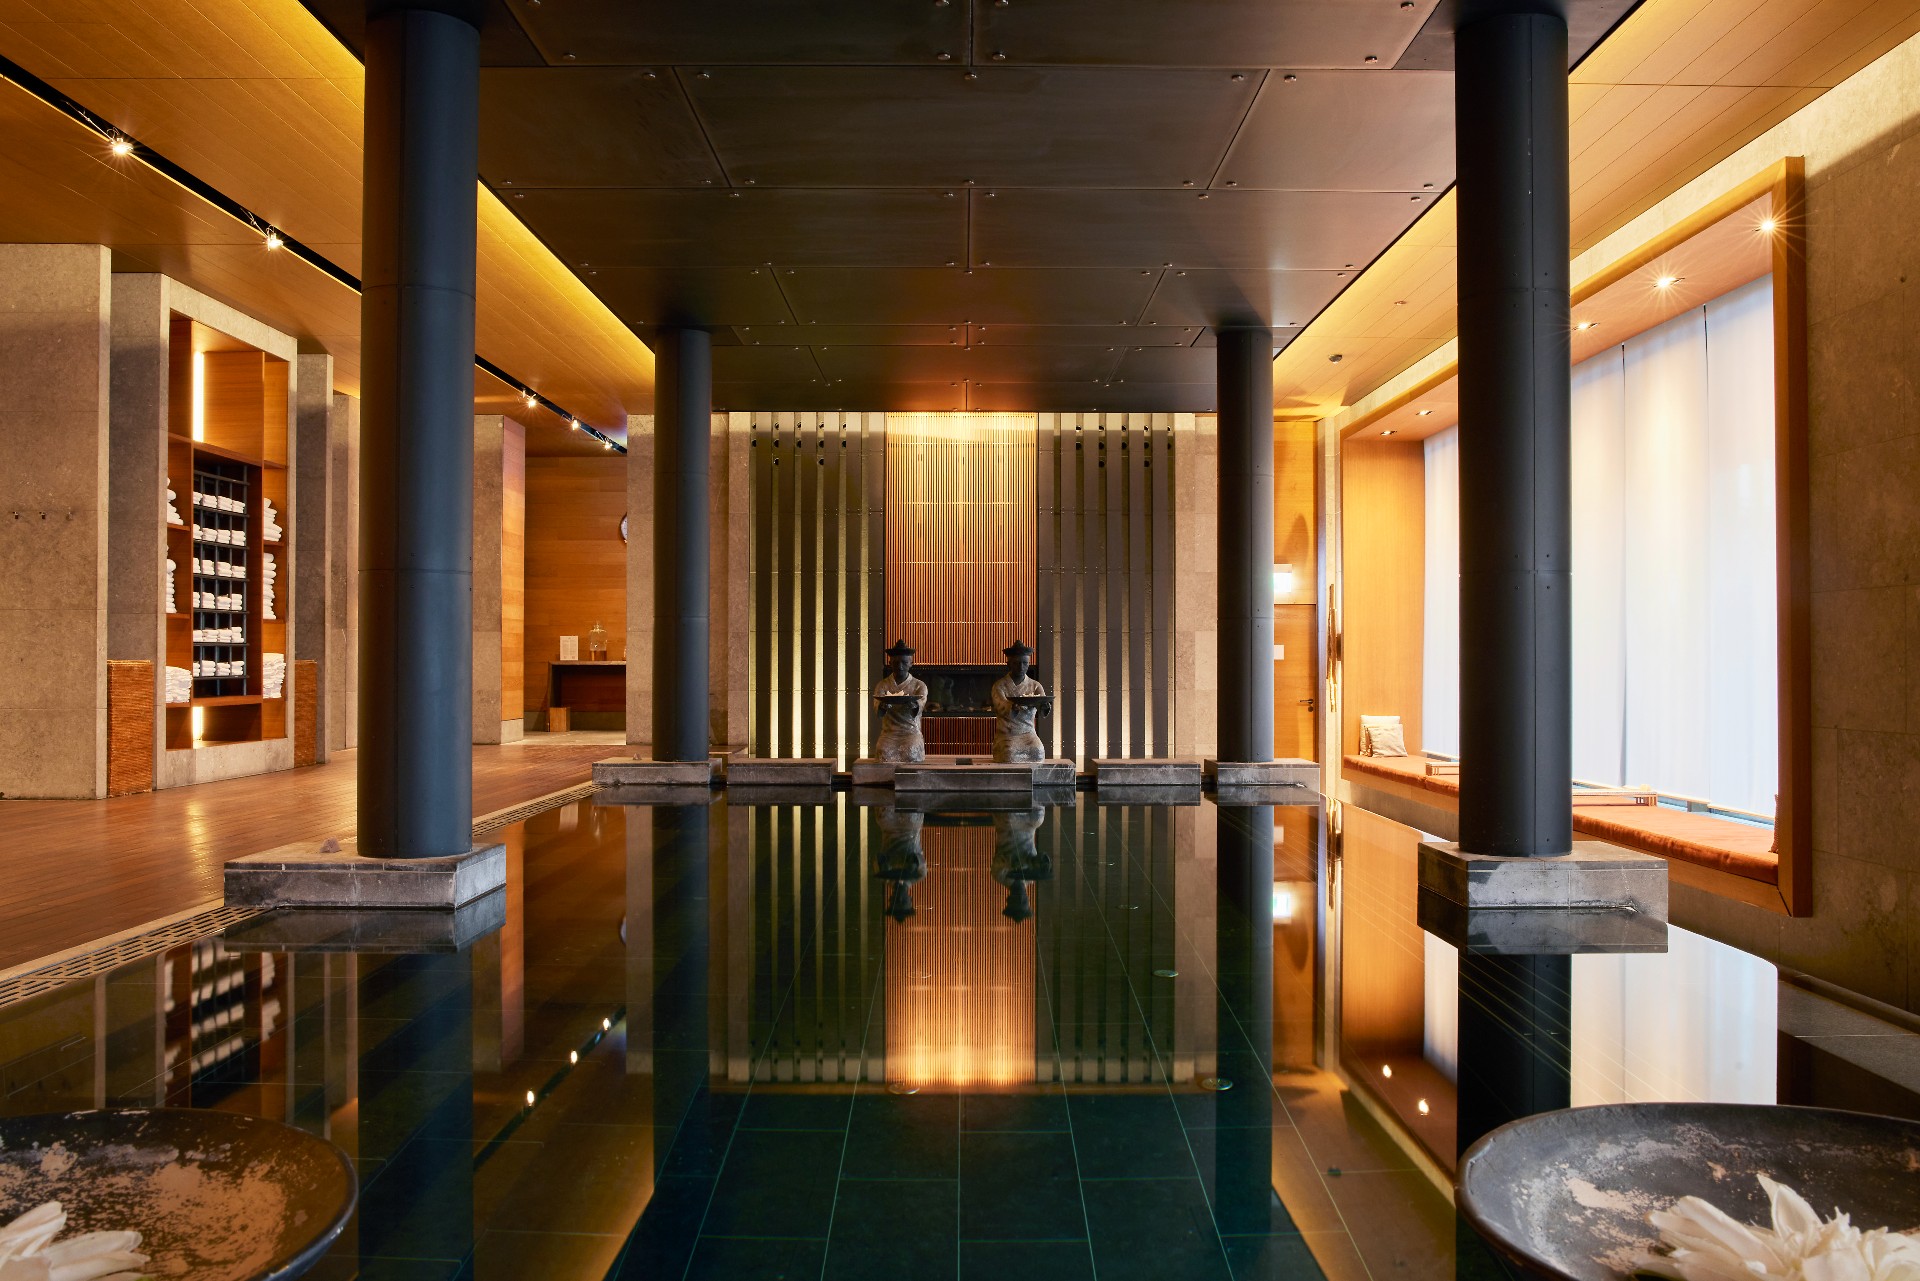 Indoor pool with 2 buddhas at the edge of it and large mighty columns. Relaxed atmosphere.